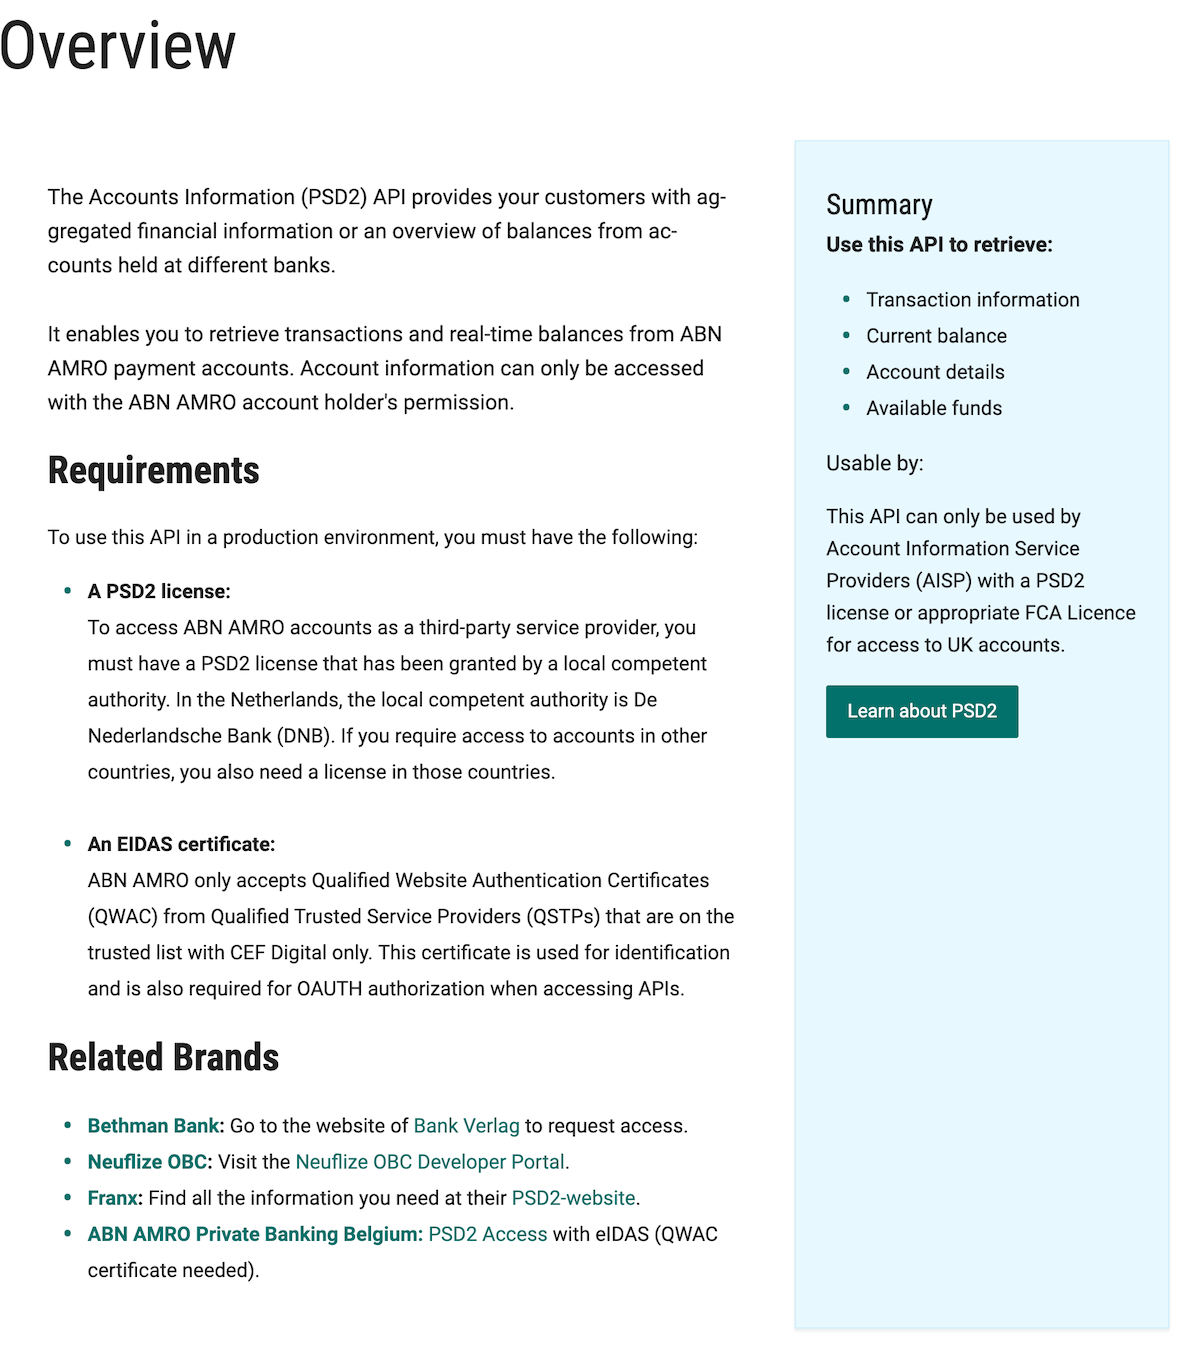 Overview page of one of ABN AMRO’s API summary pages. Users can find here the requirements, a short summary, and related brands. 